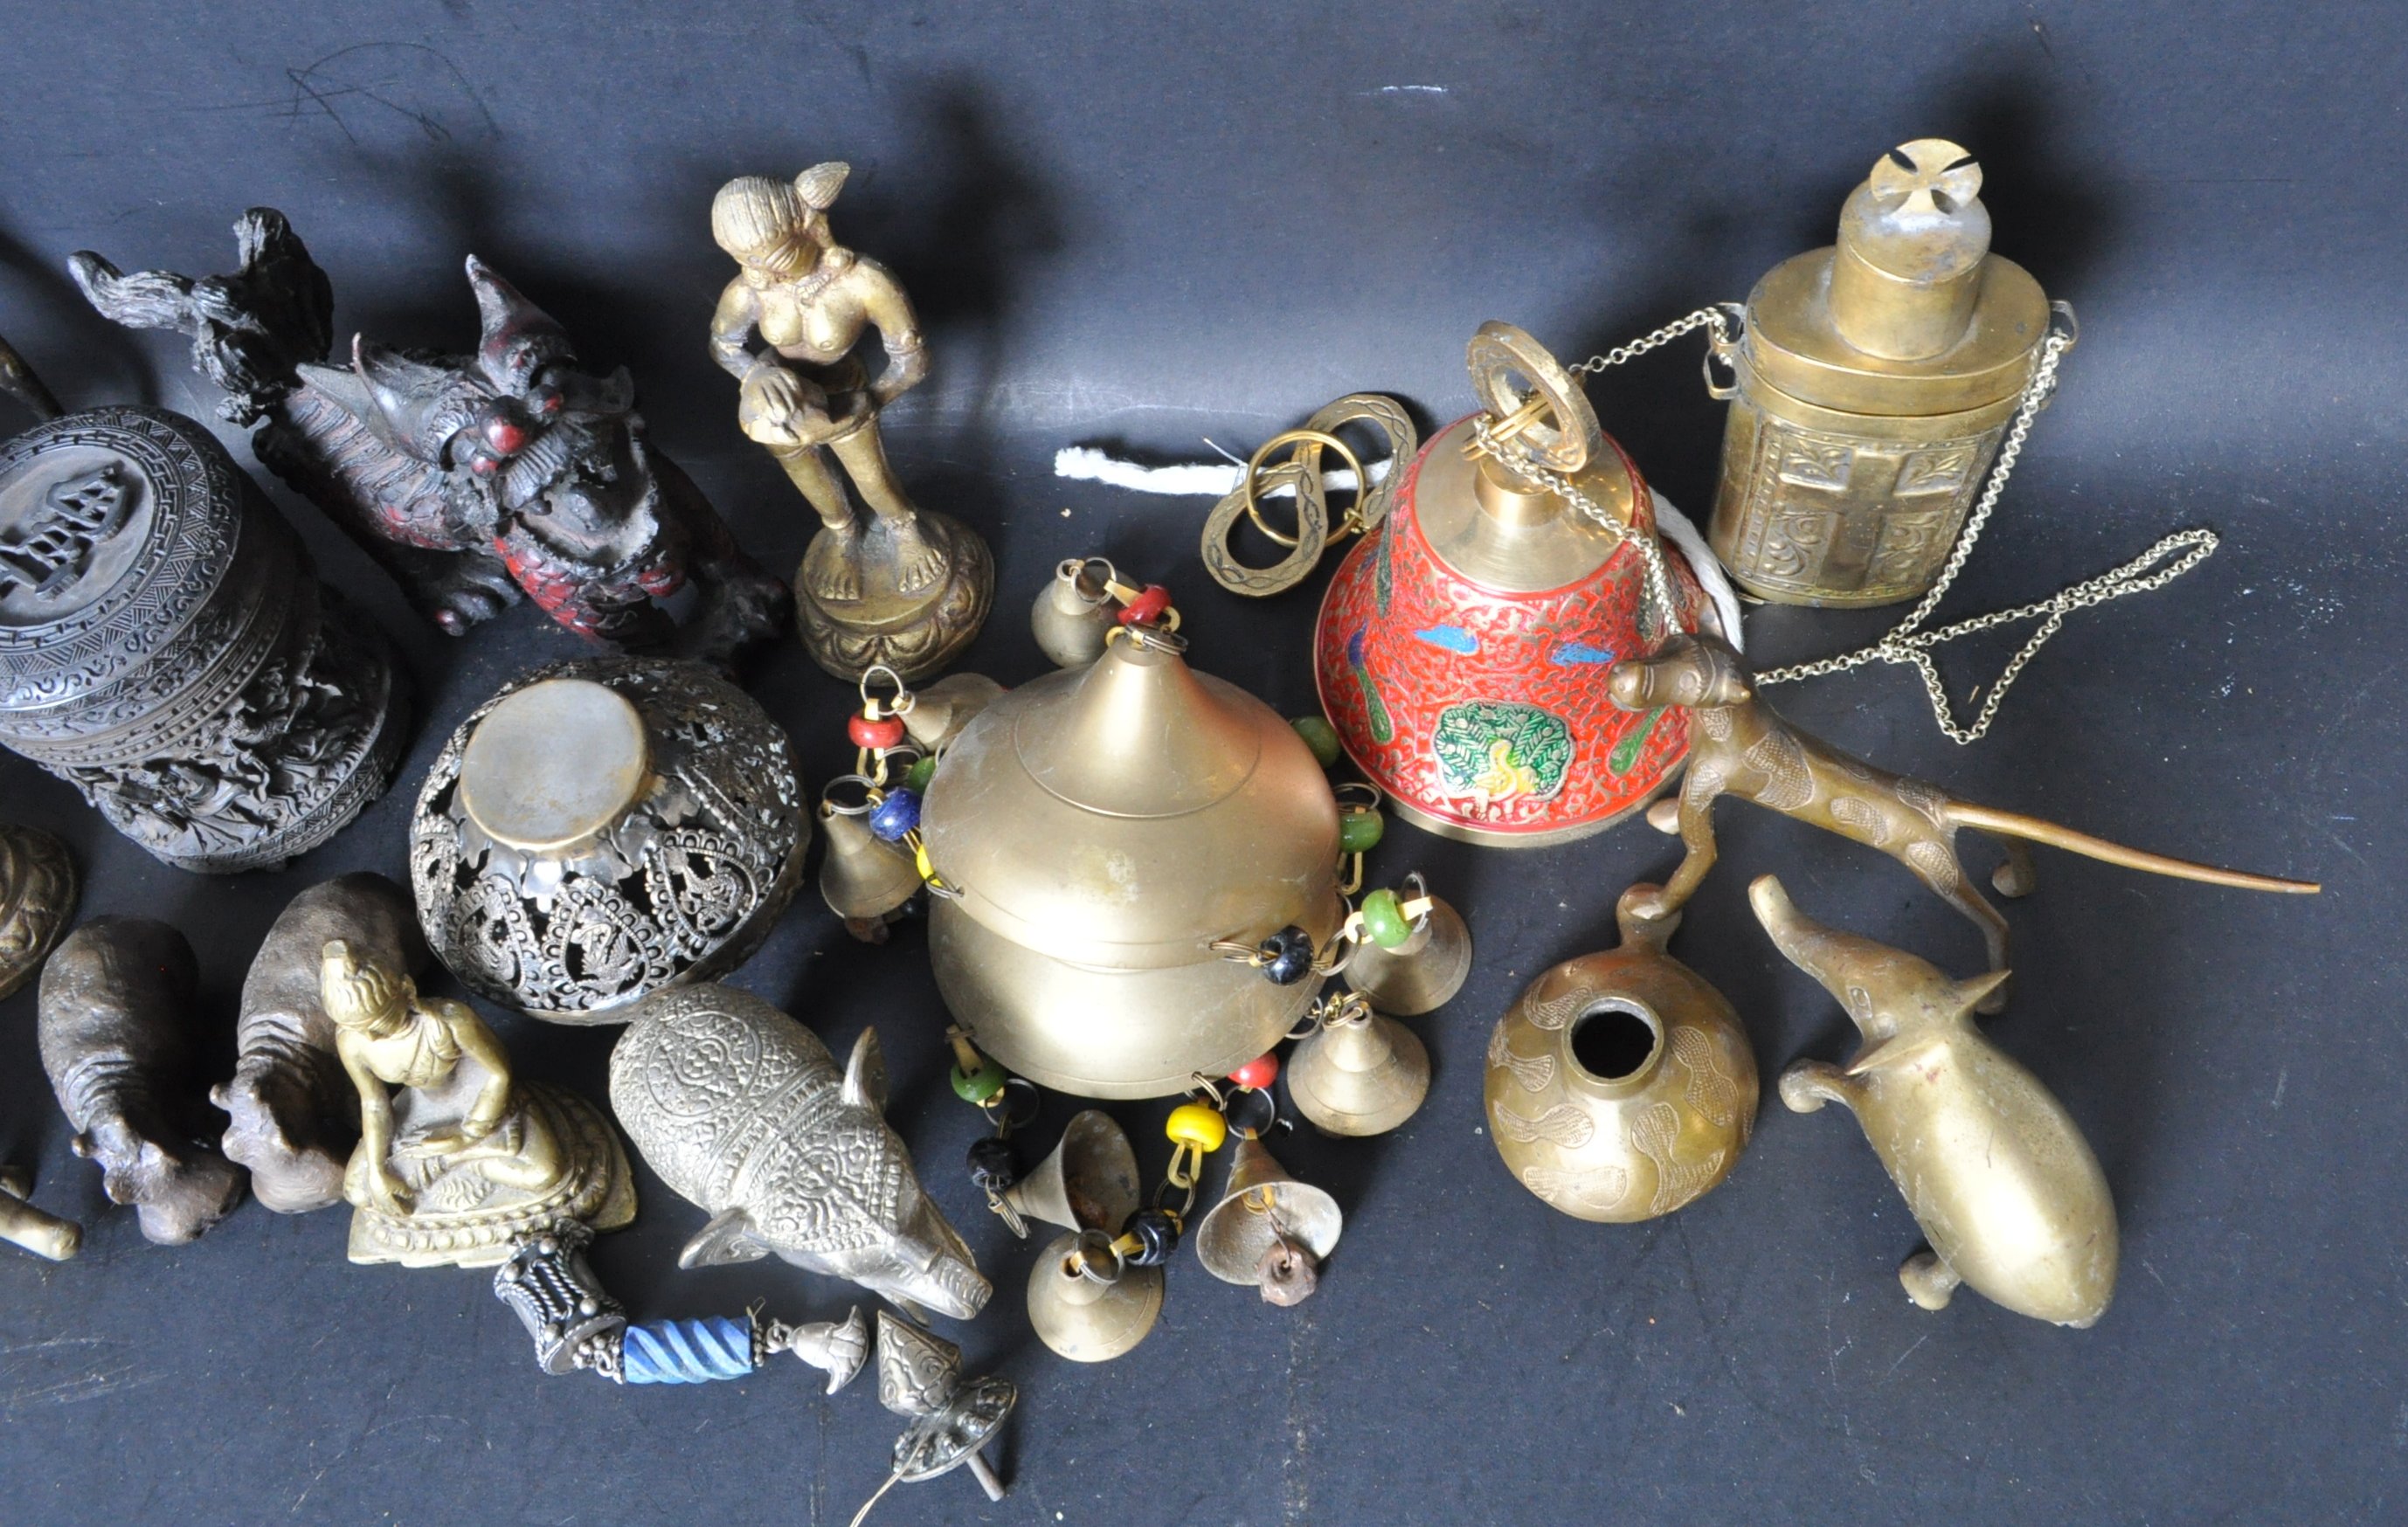 LARGE COLLECTION OF BRASS WARE AND HINDU FIGURINES - Image 4 of 9